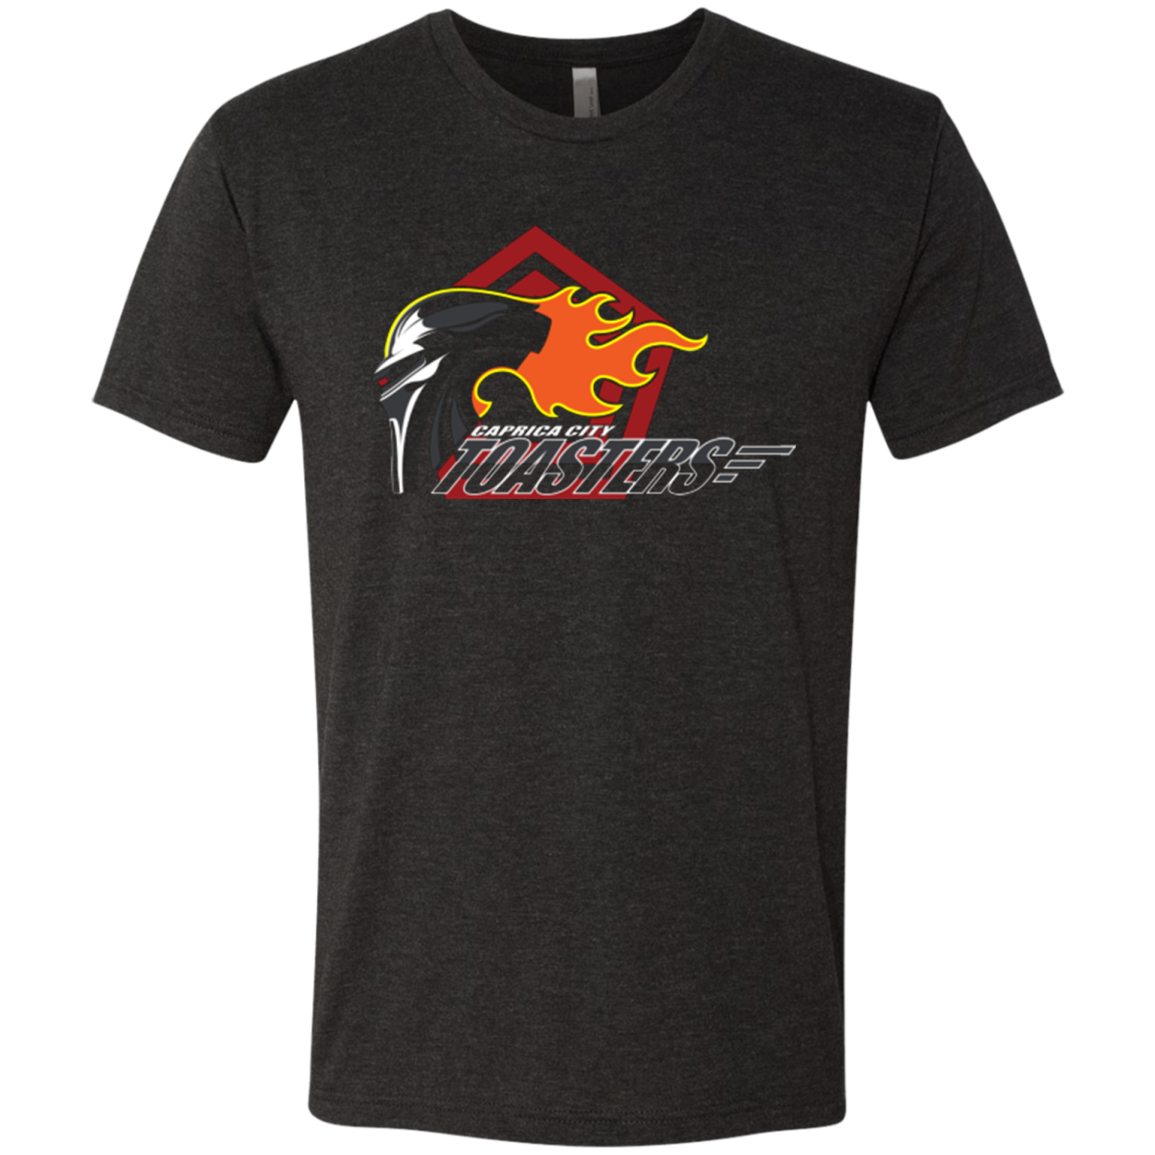 Caprica City Toasters Men's Triblend T-Shirt